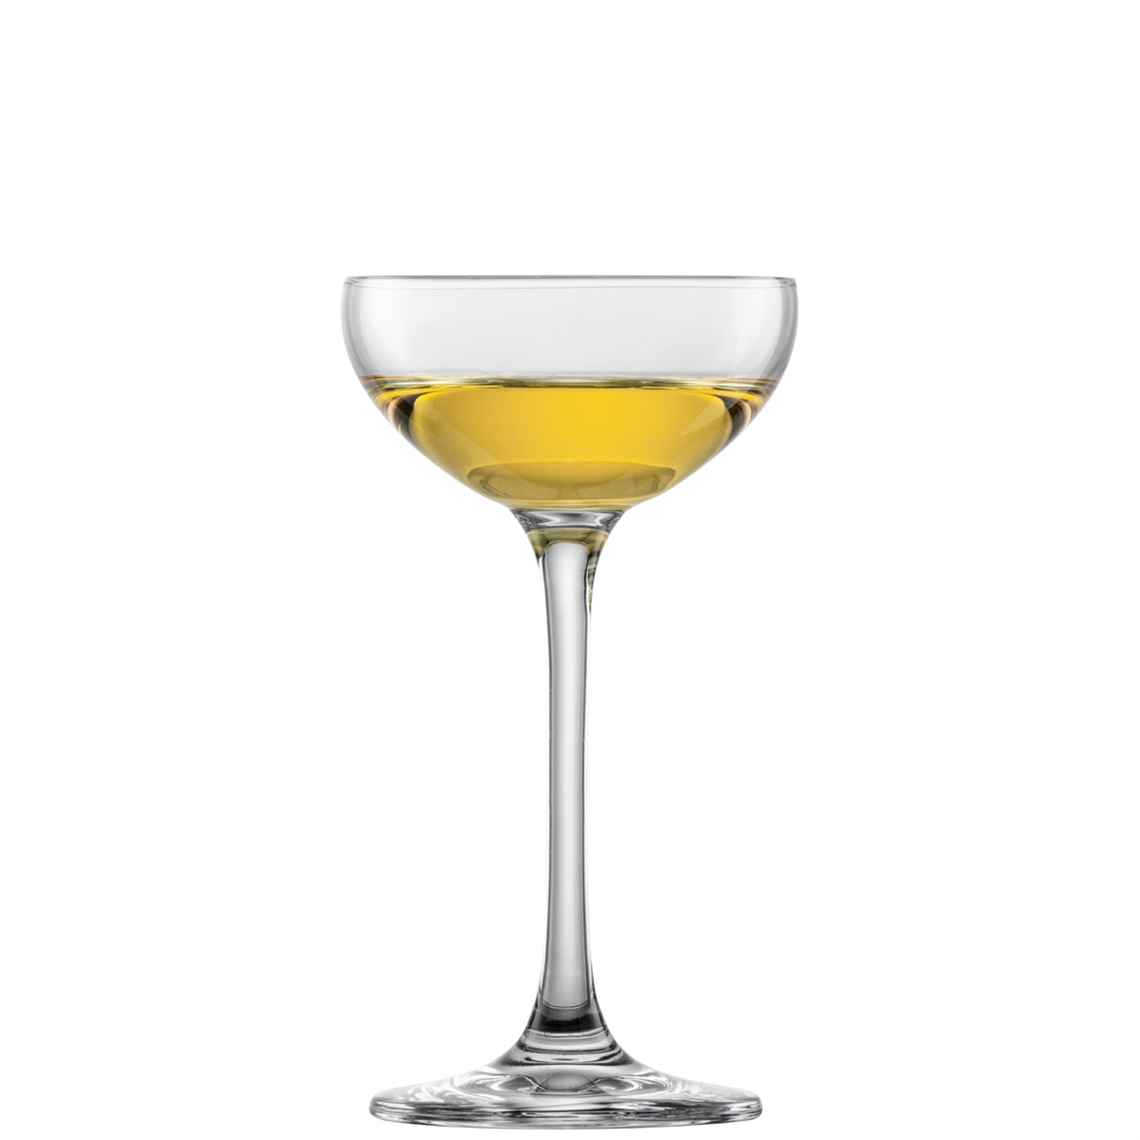 View more spirit glasses from our Liqueur Glasses range